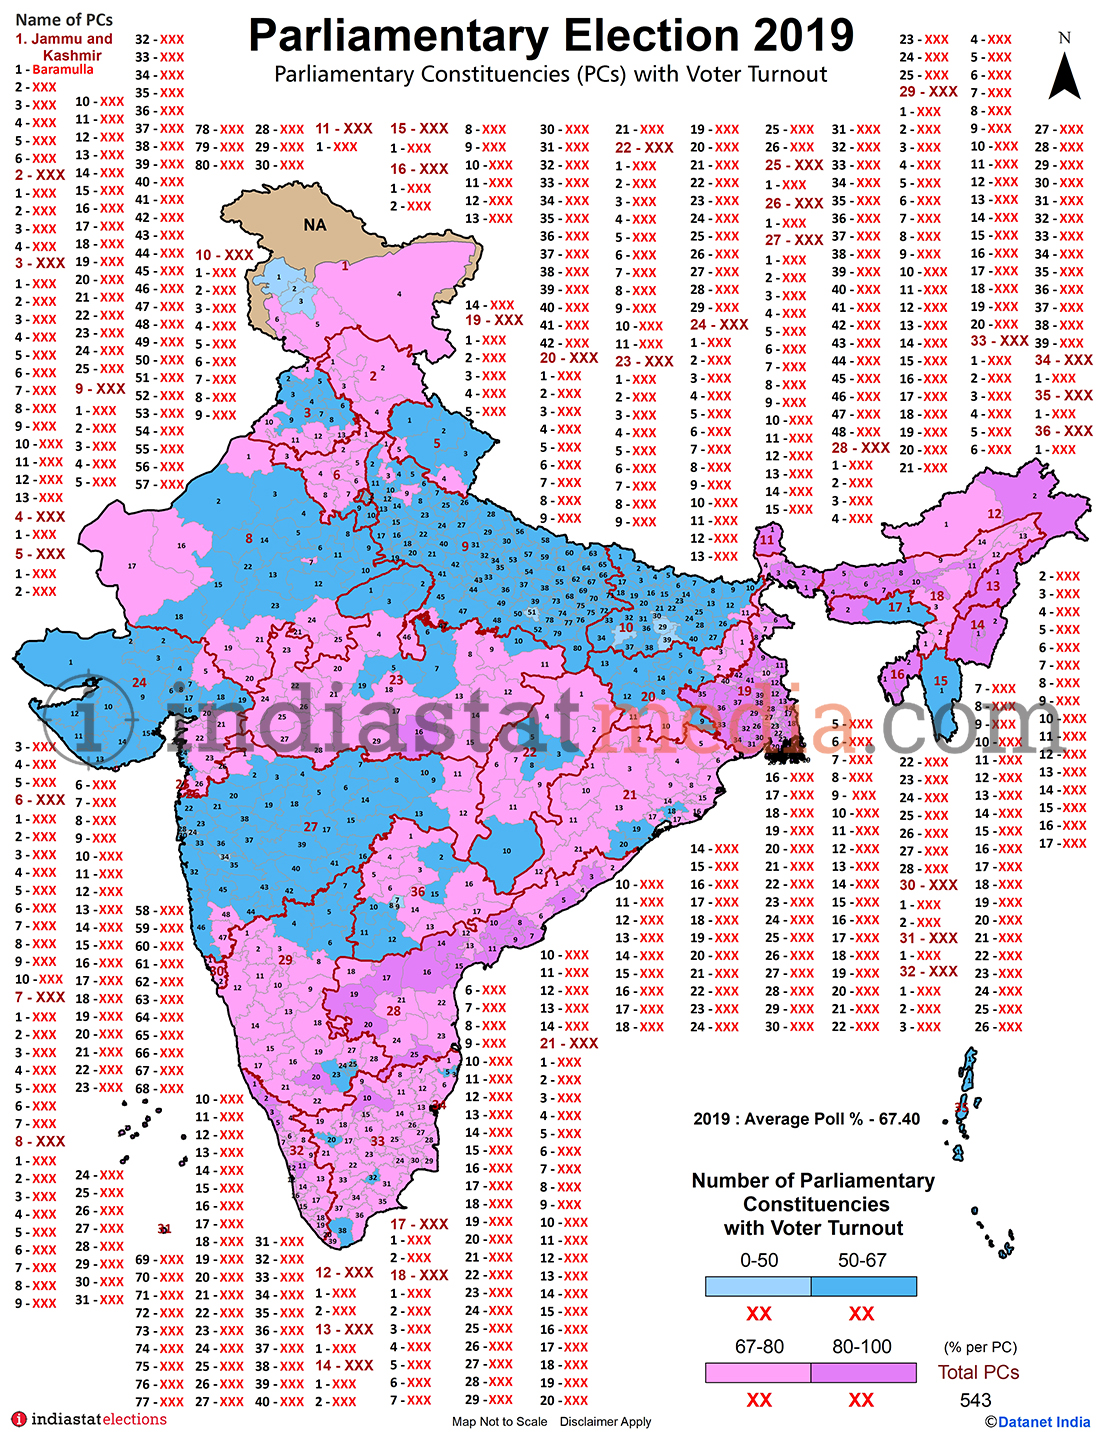 Parliamentary Constituencies with Voter Turnout in India (Parliamentary Election - 2019)